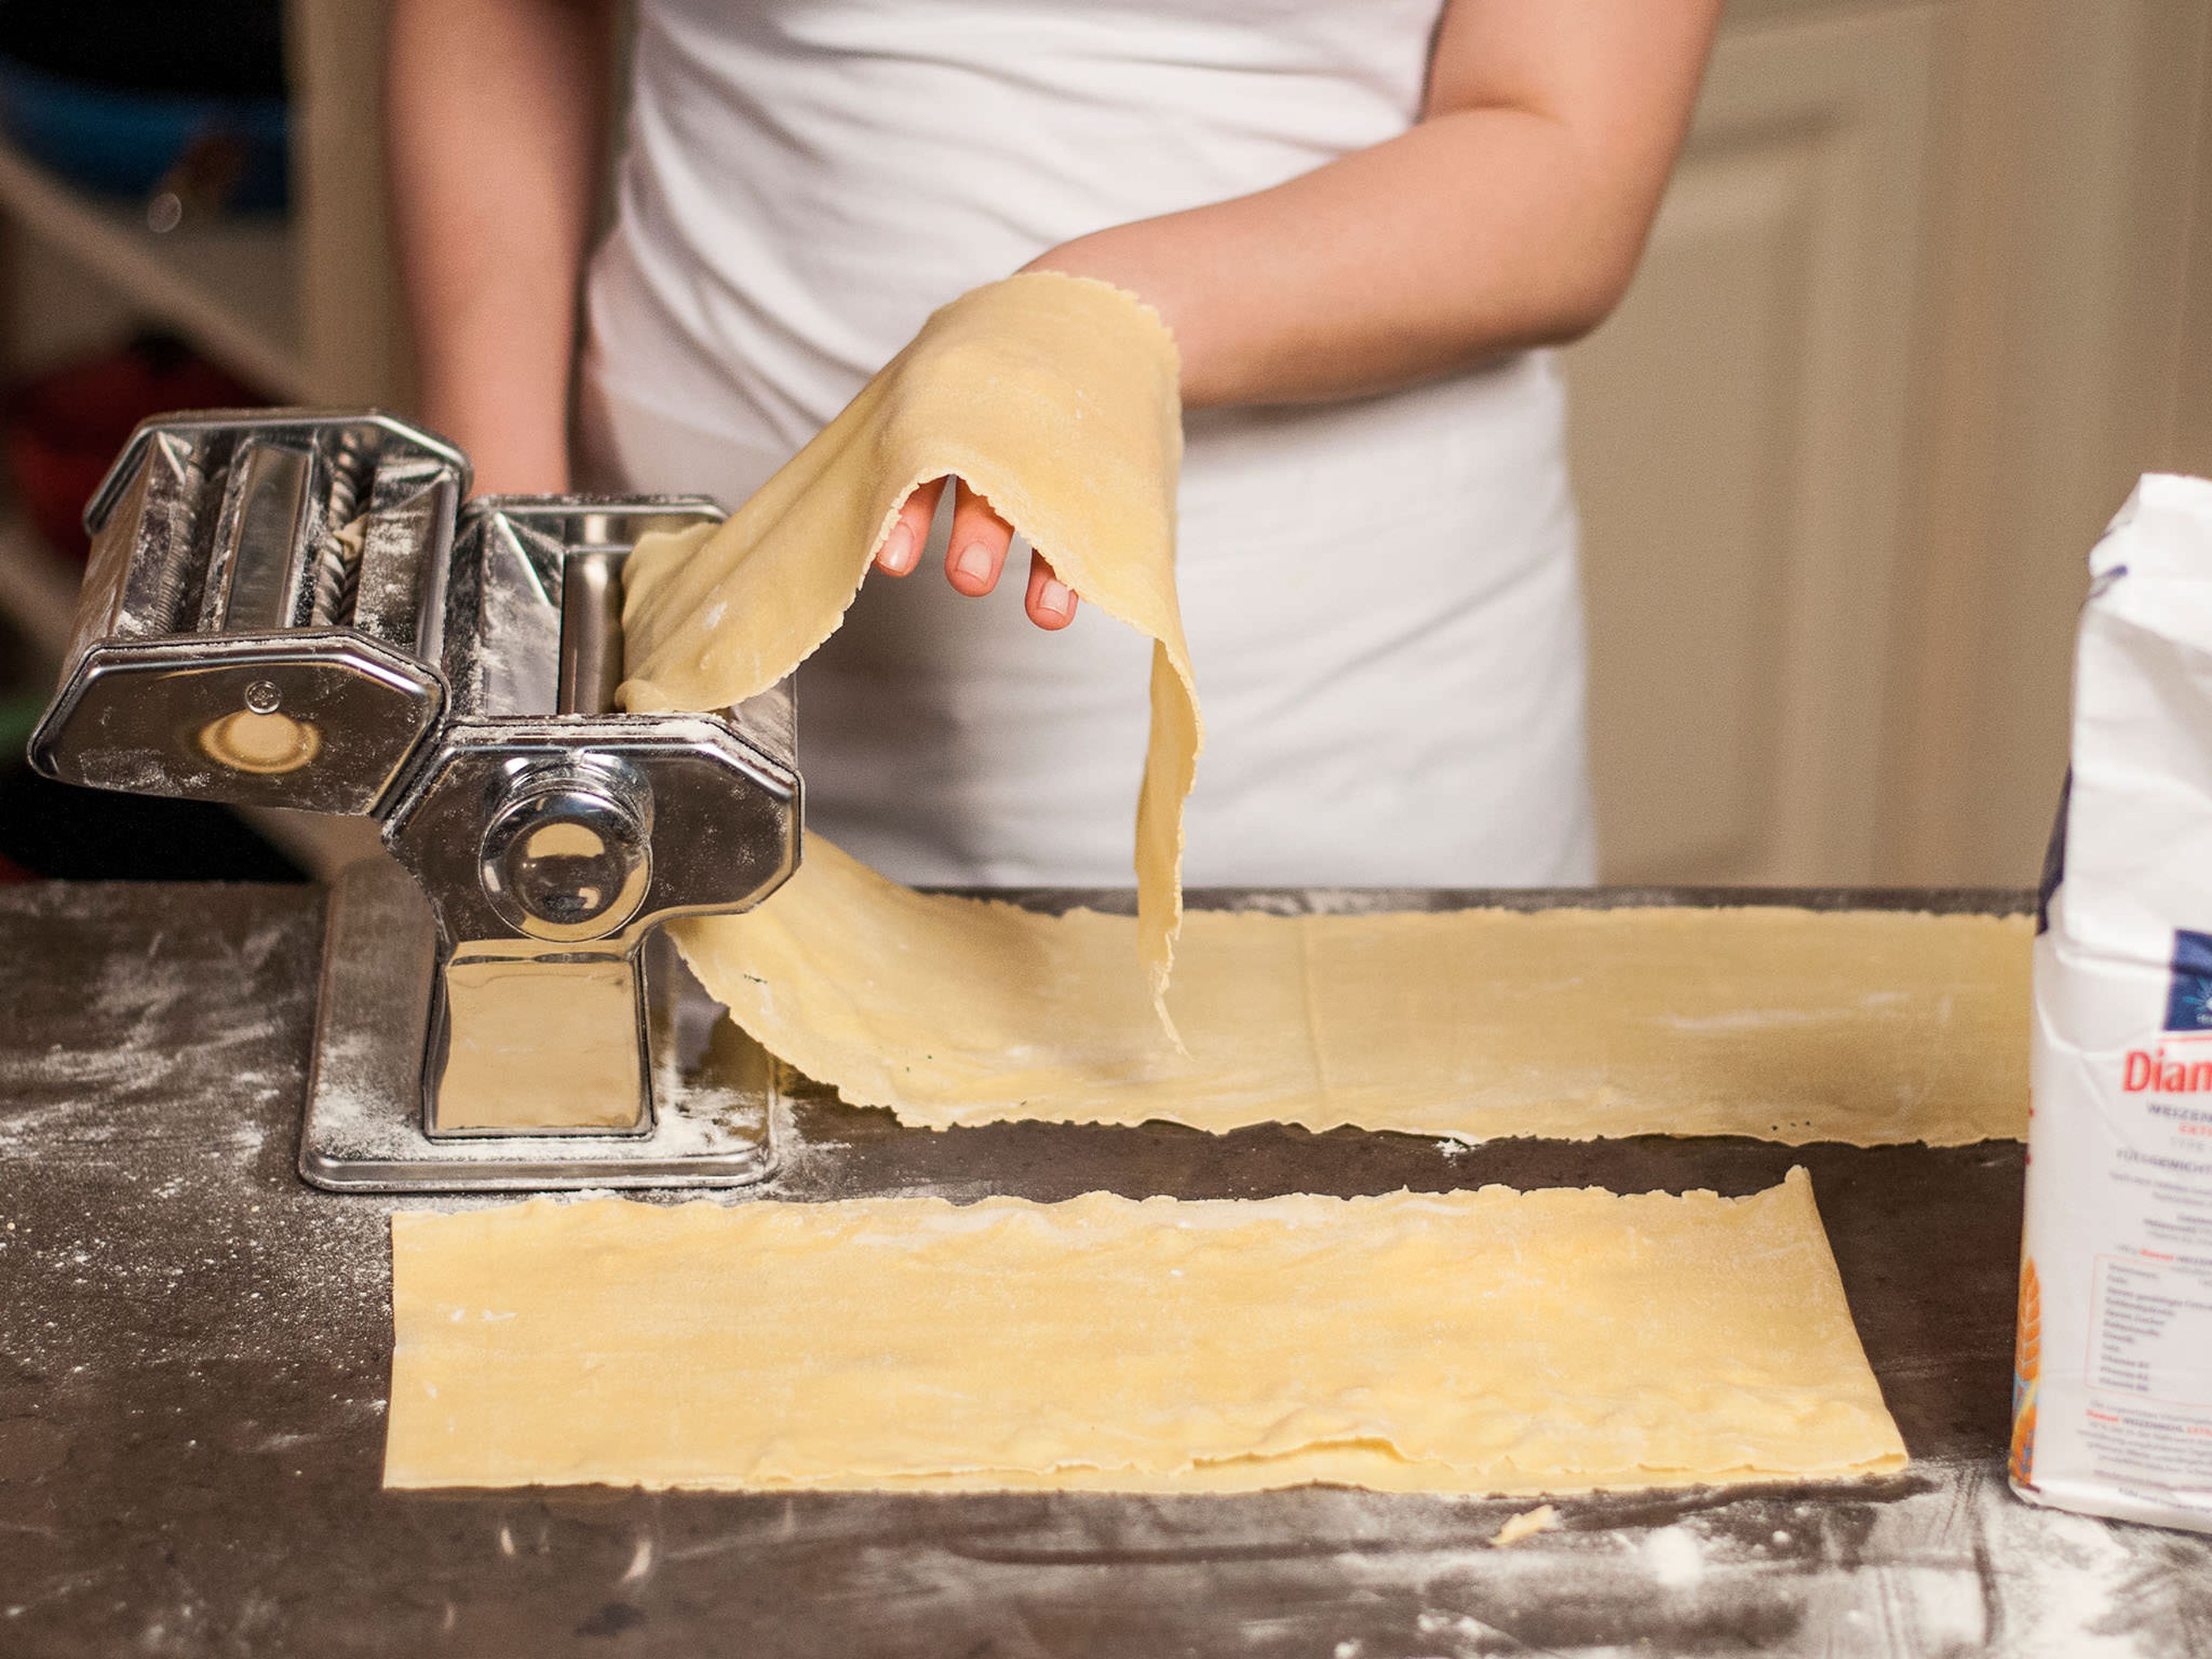 Halve pasta dough. Roll out both halves as thinly as possible on a floured surface with a rolling pin or a pasta machine into 5 cm x 40 cm strips.